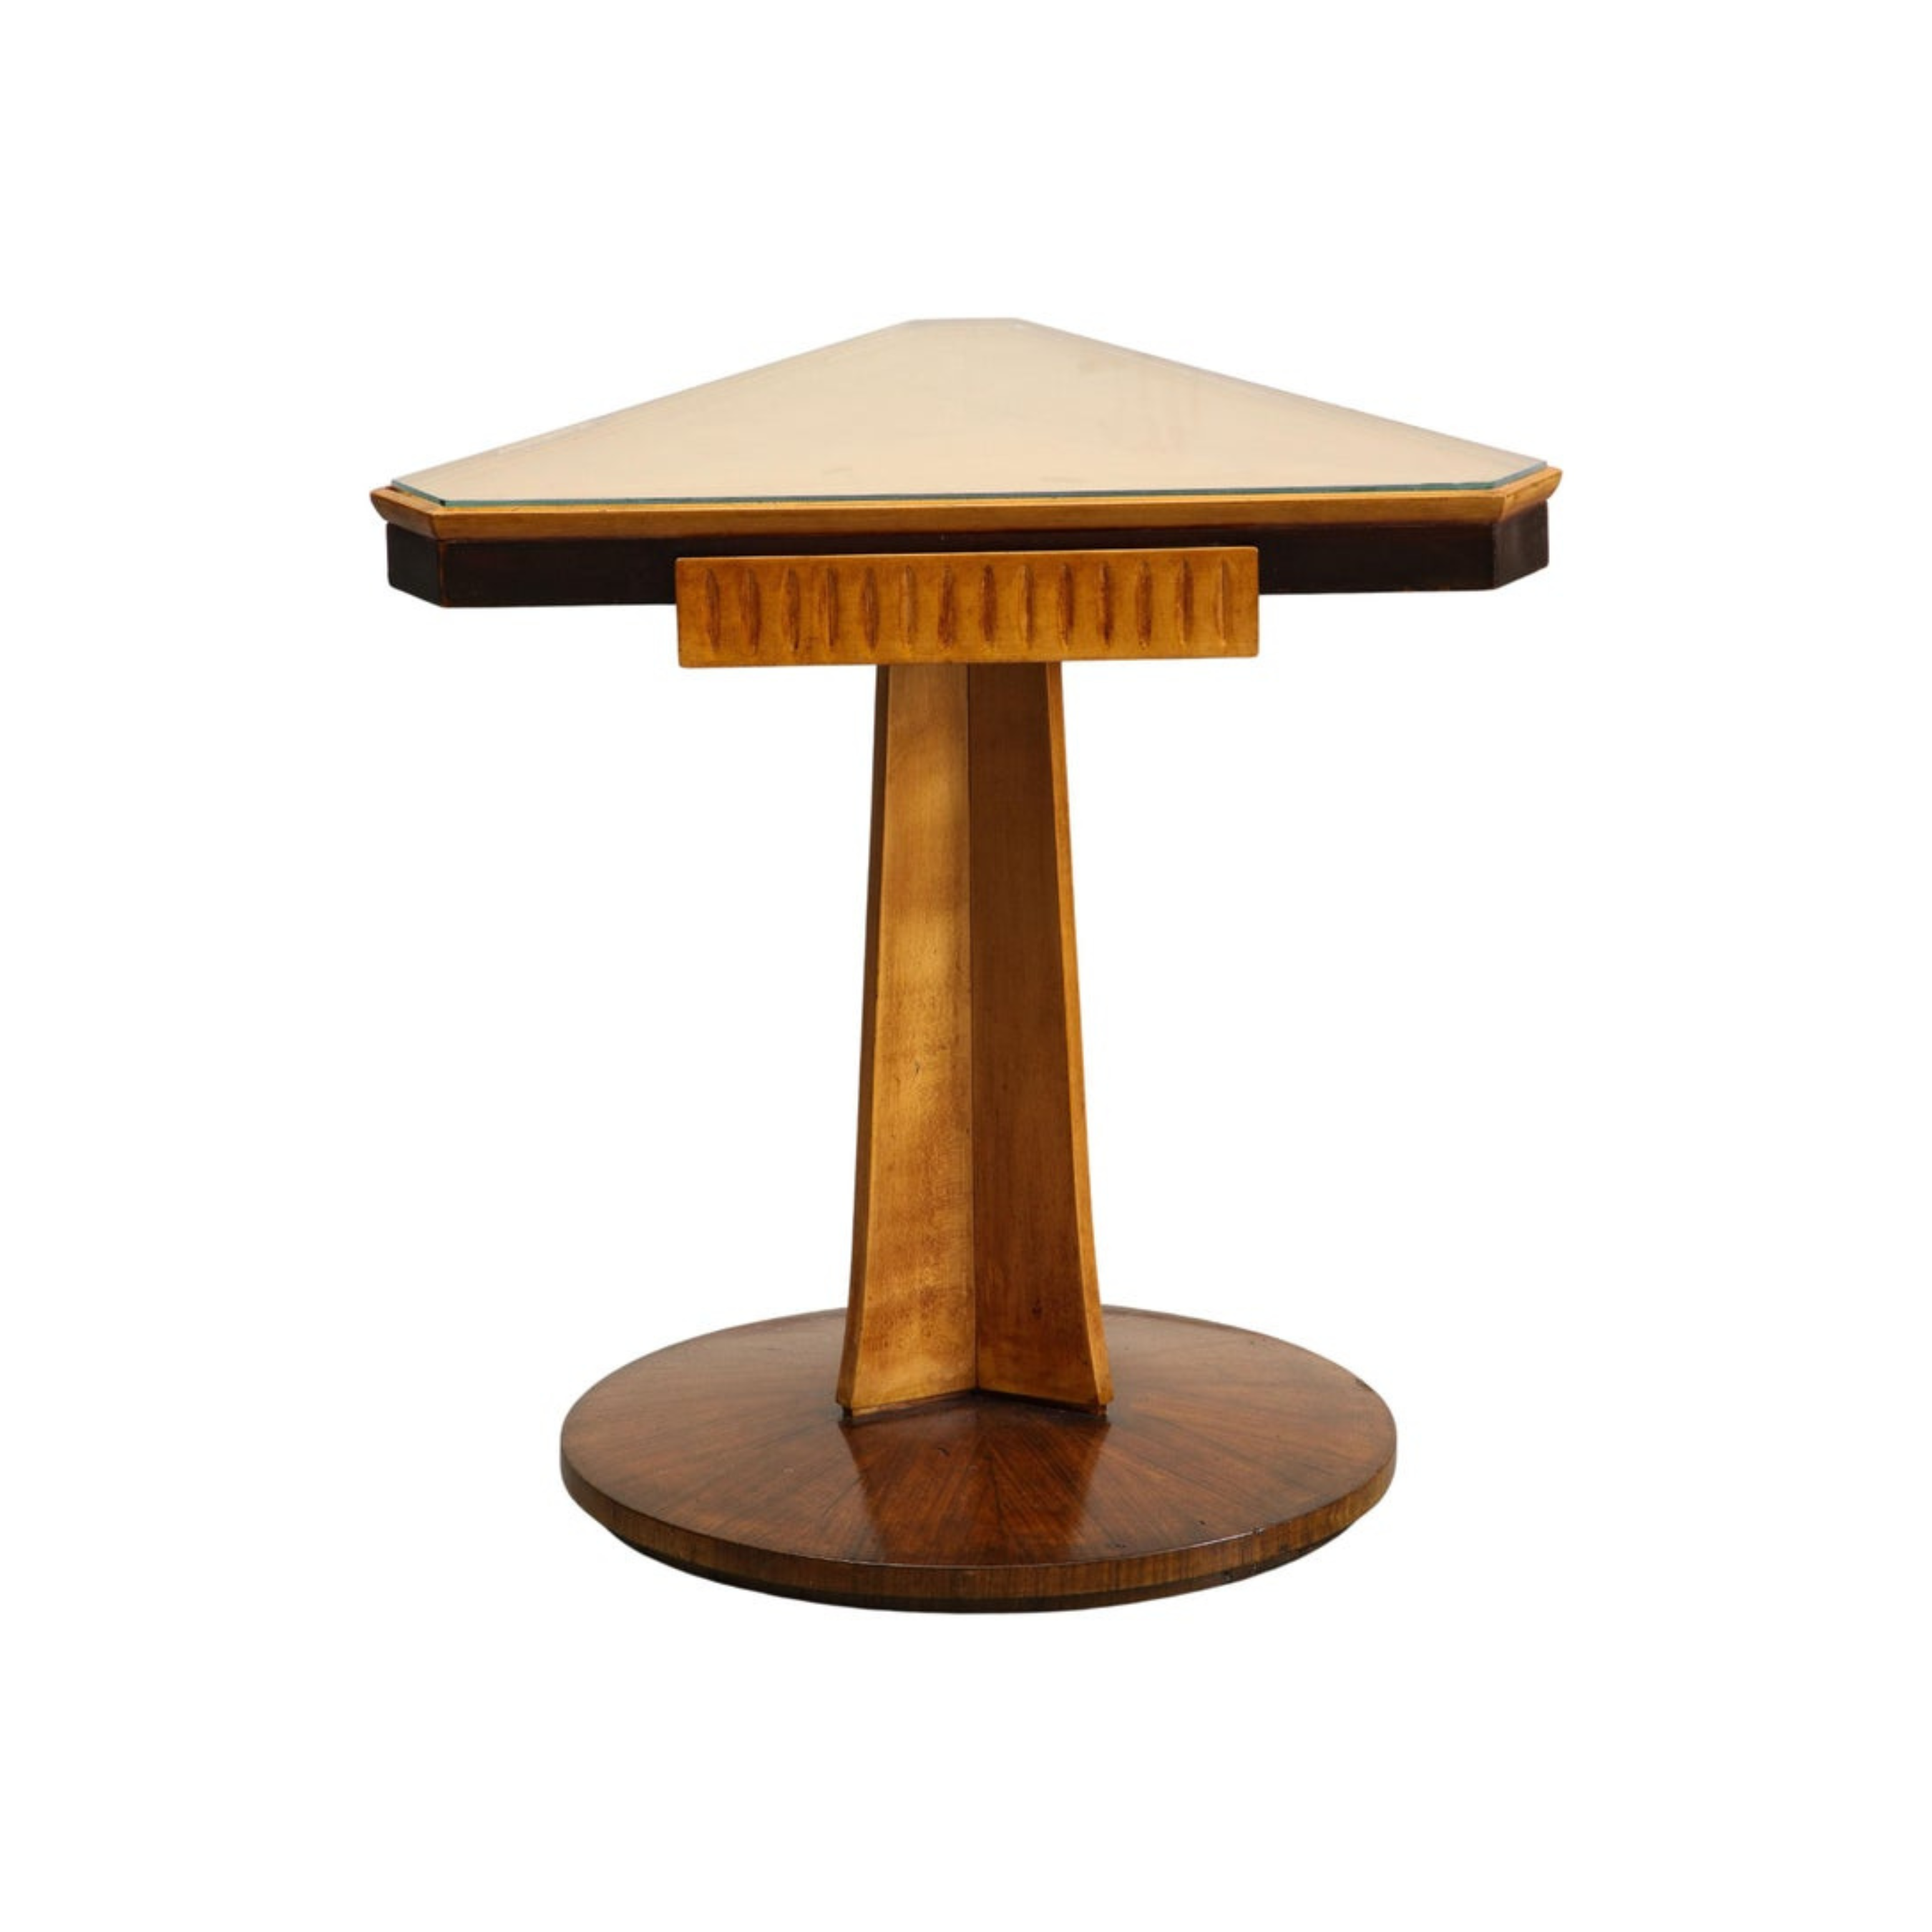 Midcentury Italian Triangular Fruitwood Side Table with Glass Top